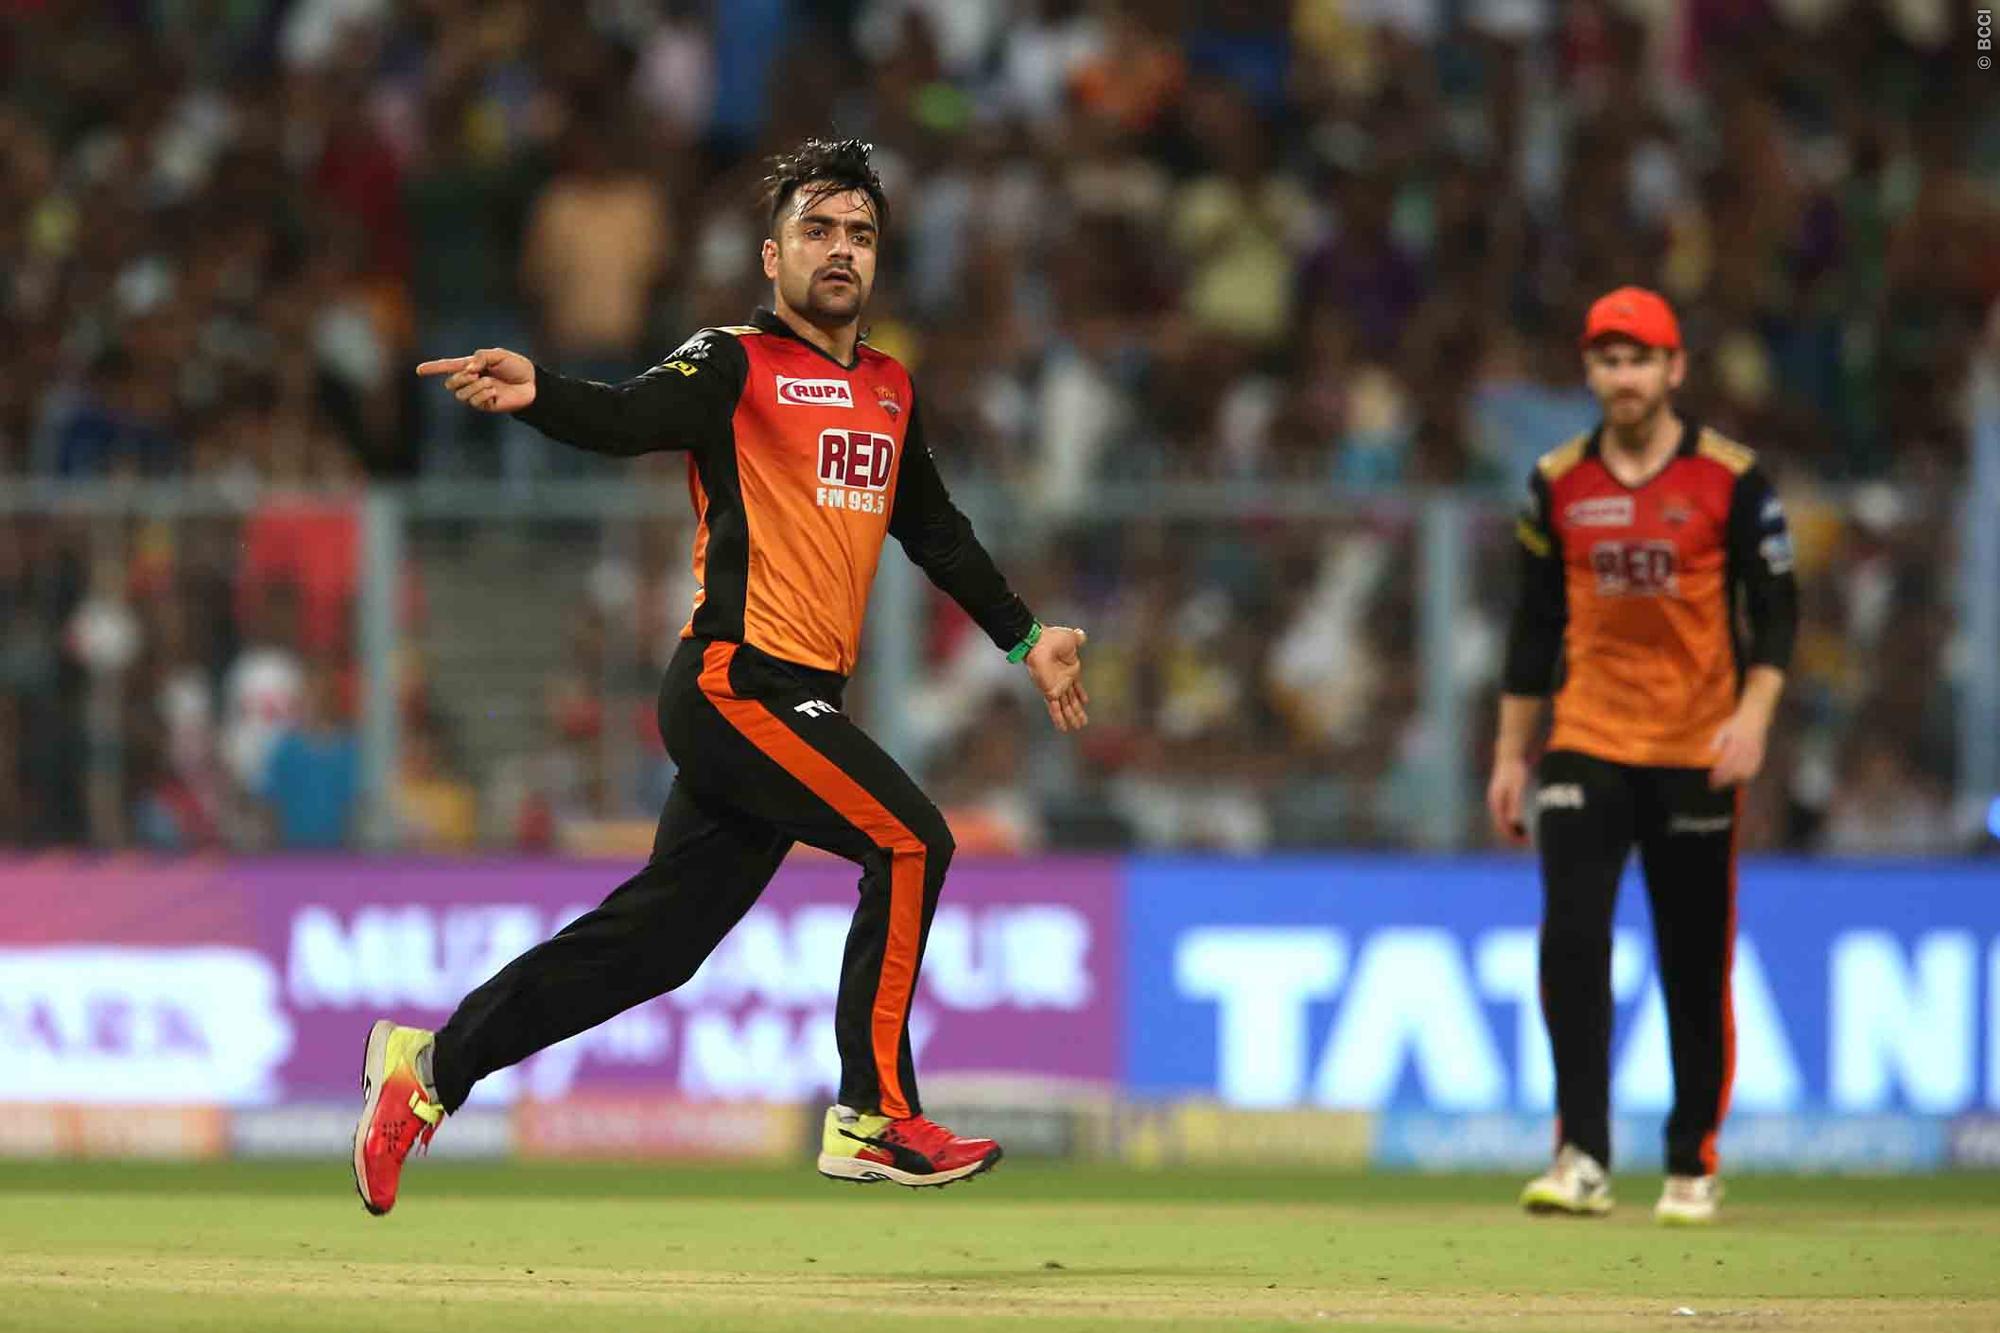 Super All Rounder Rashid Khan Sizzles, Sunrisers Set Up Final With CSK